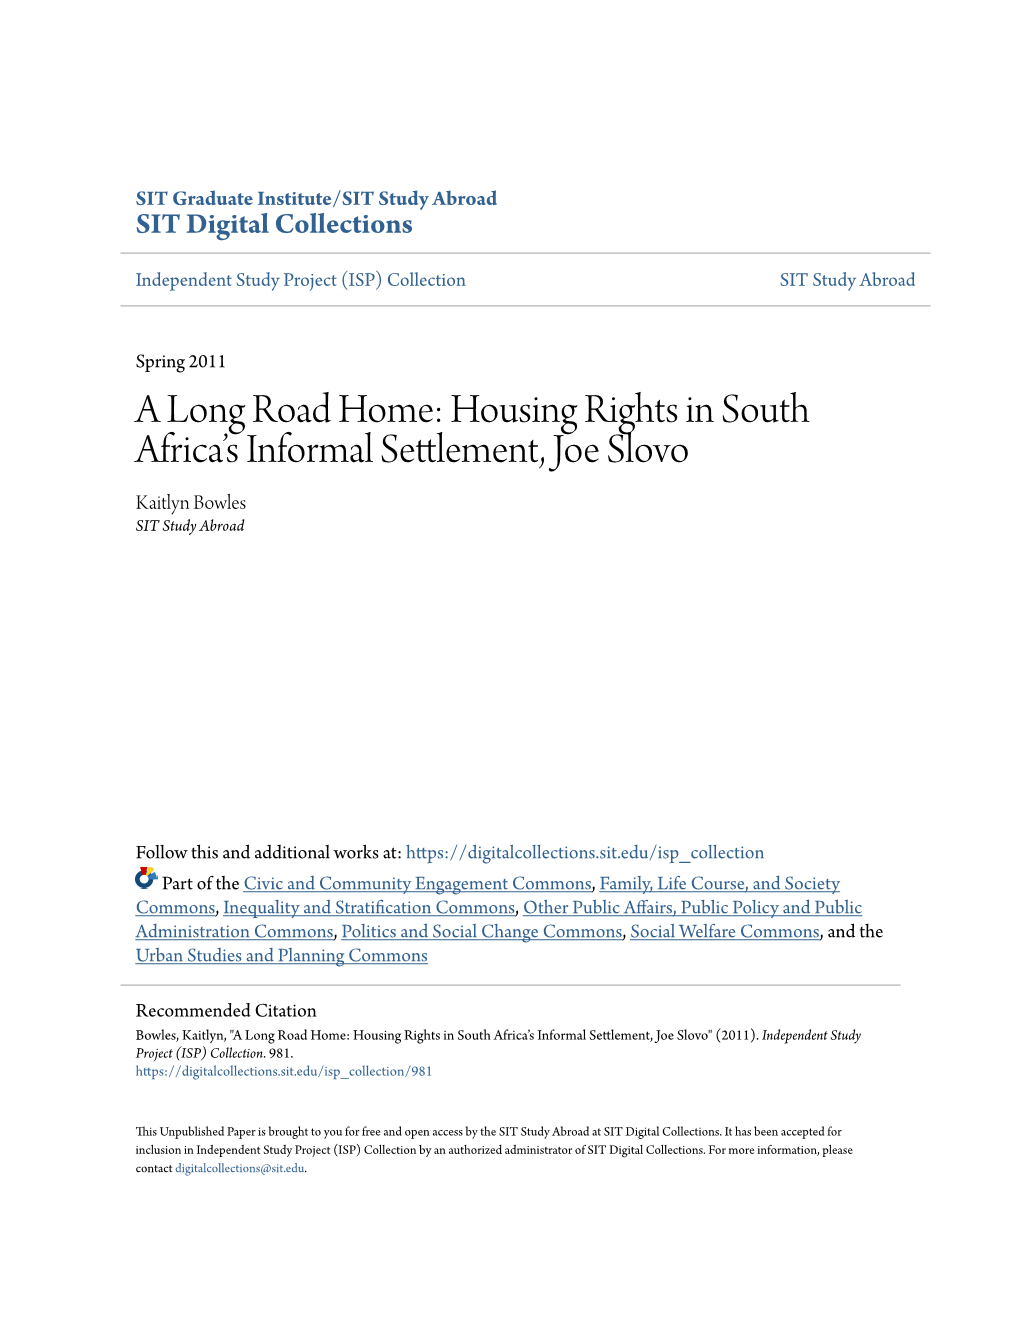 Housing Rights in South Africa's Informal